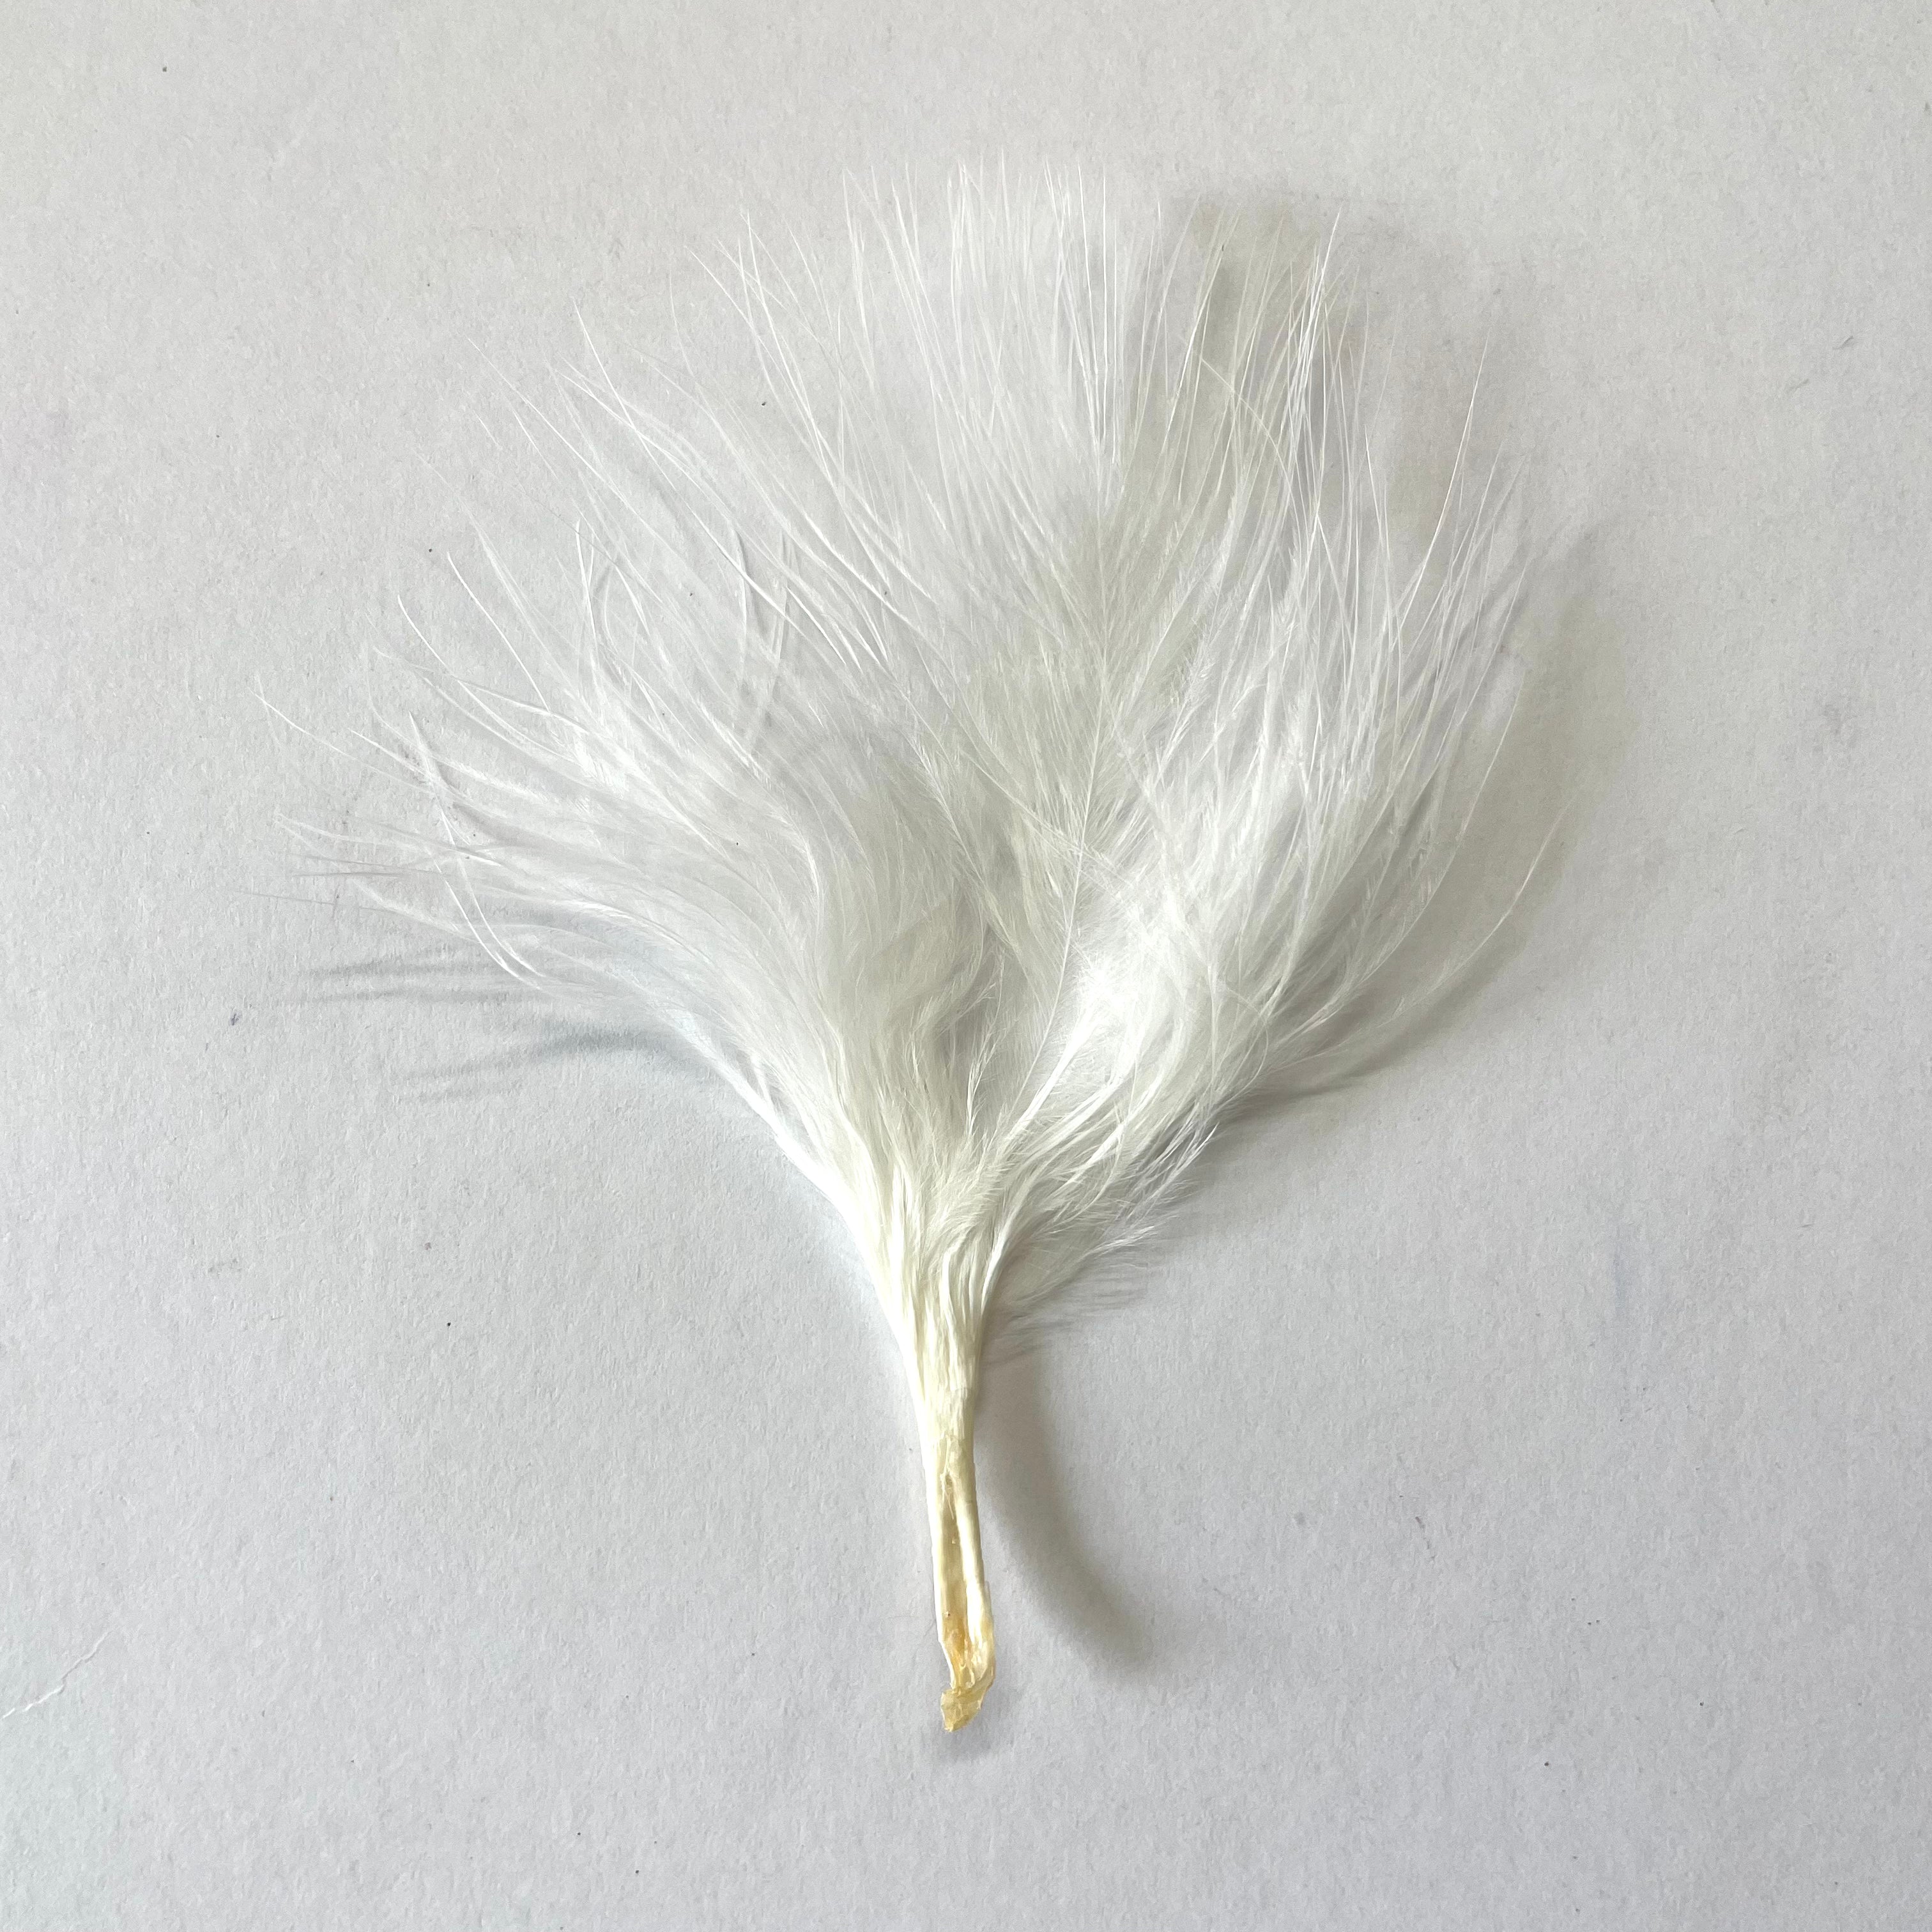 Itty Bitty Marabou Feather Plumage Pack 10 grams - White